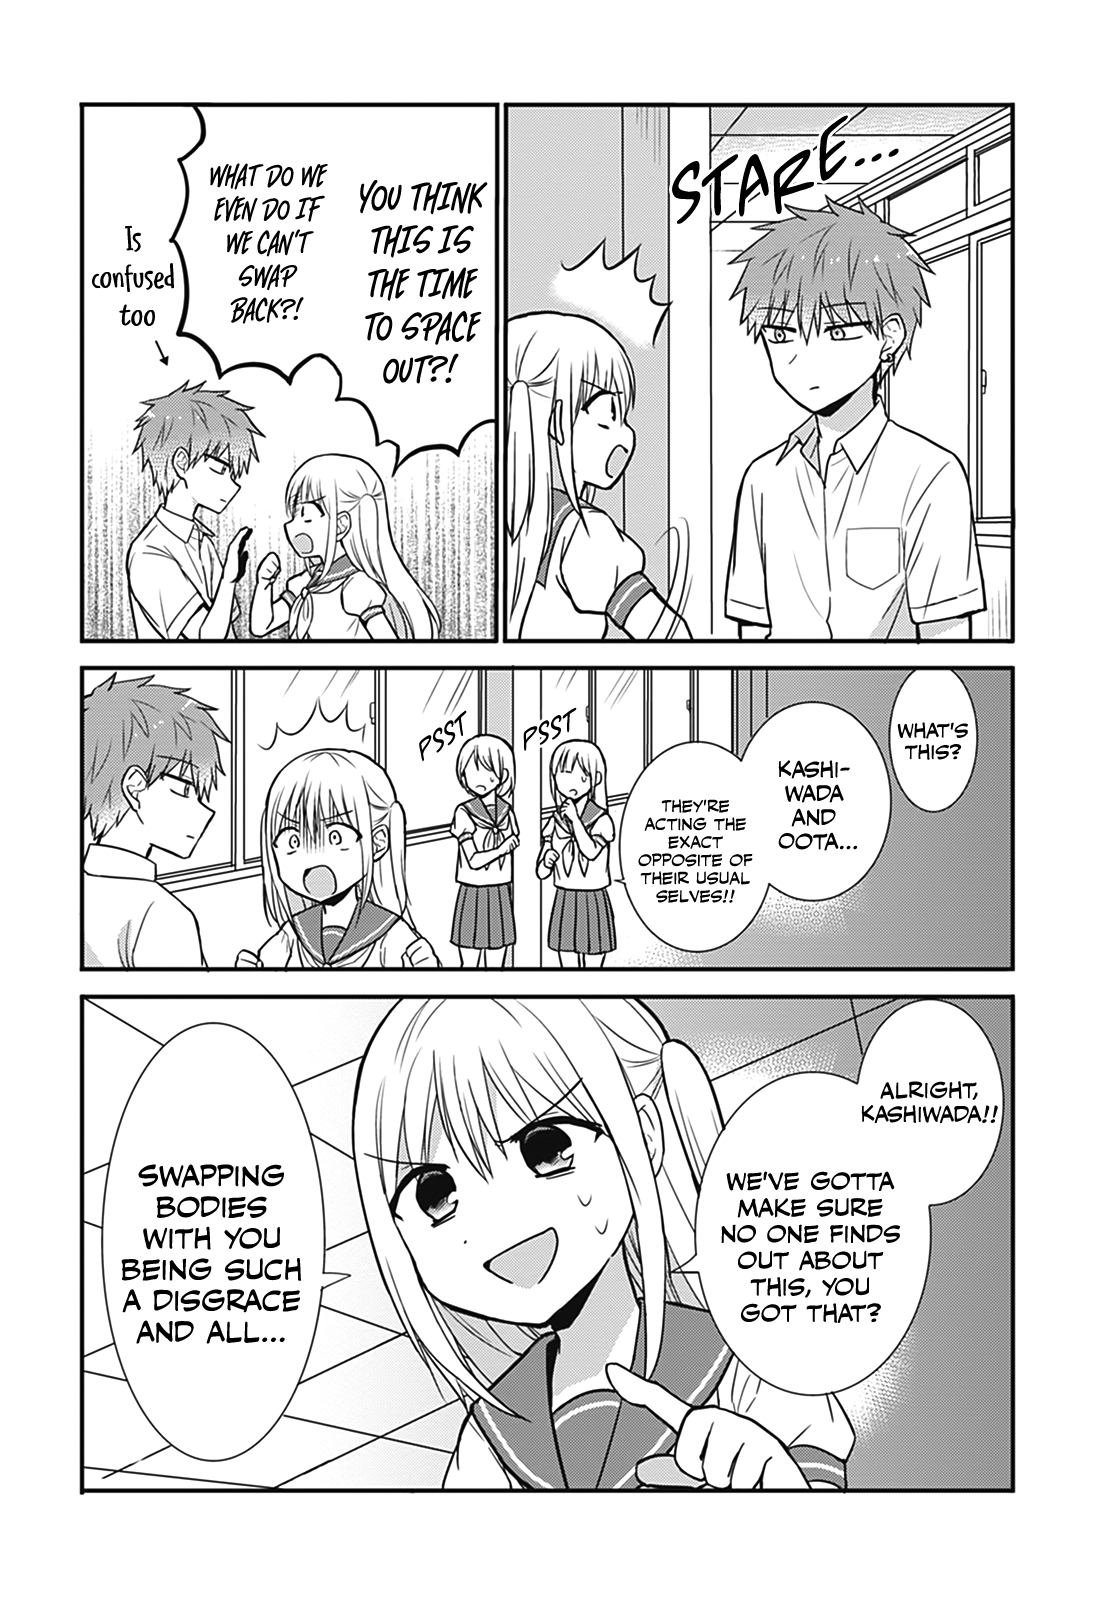 Expressionless Kashiwada-San And Emotional Oota-Kun Vol.2 Chapter 25.5: Kashiwada-San And Oota-Kun Swap Bodies - Picture 3